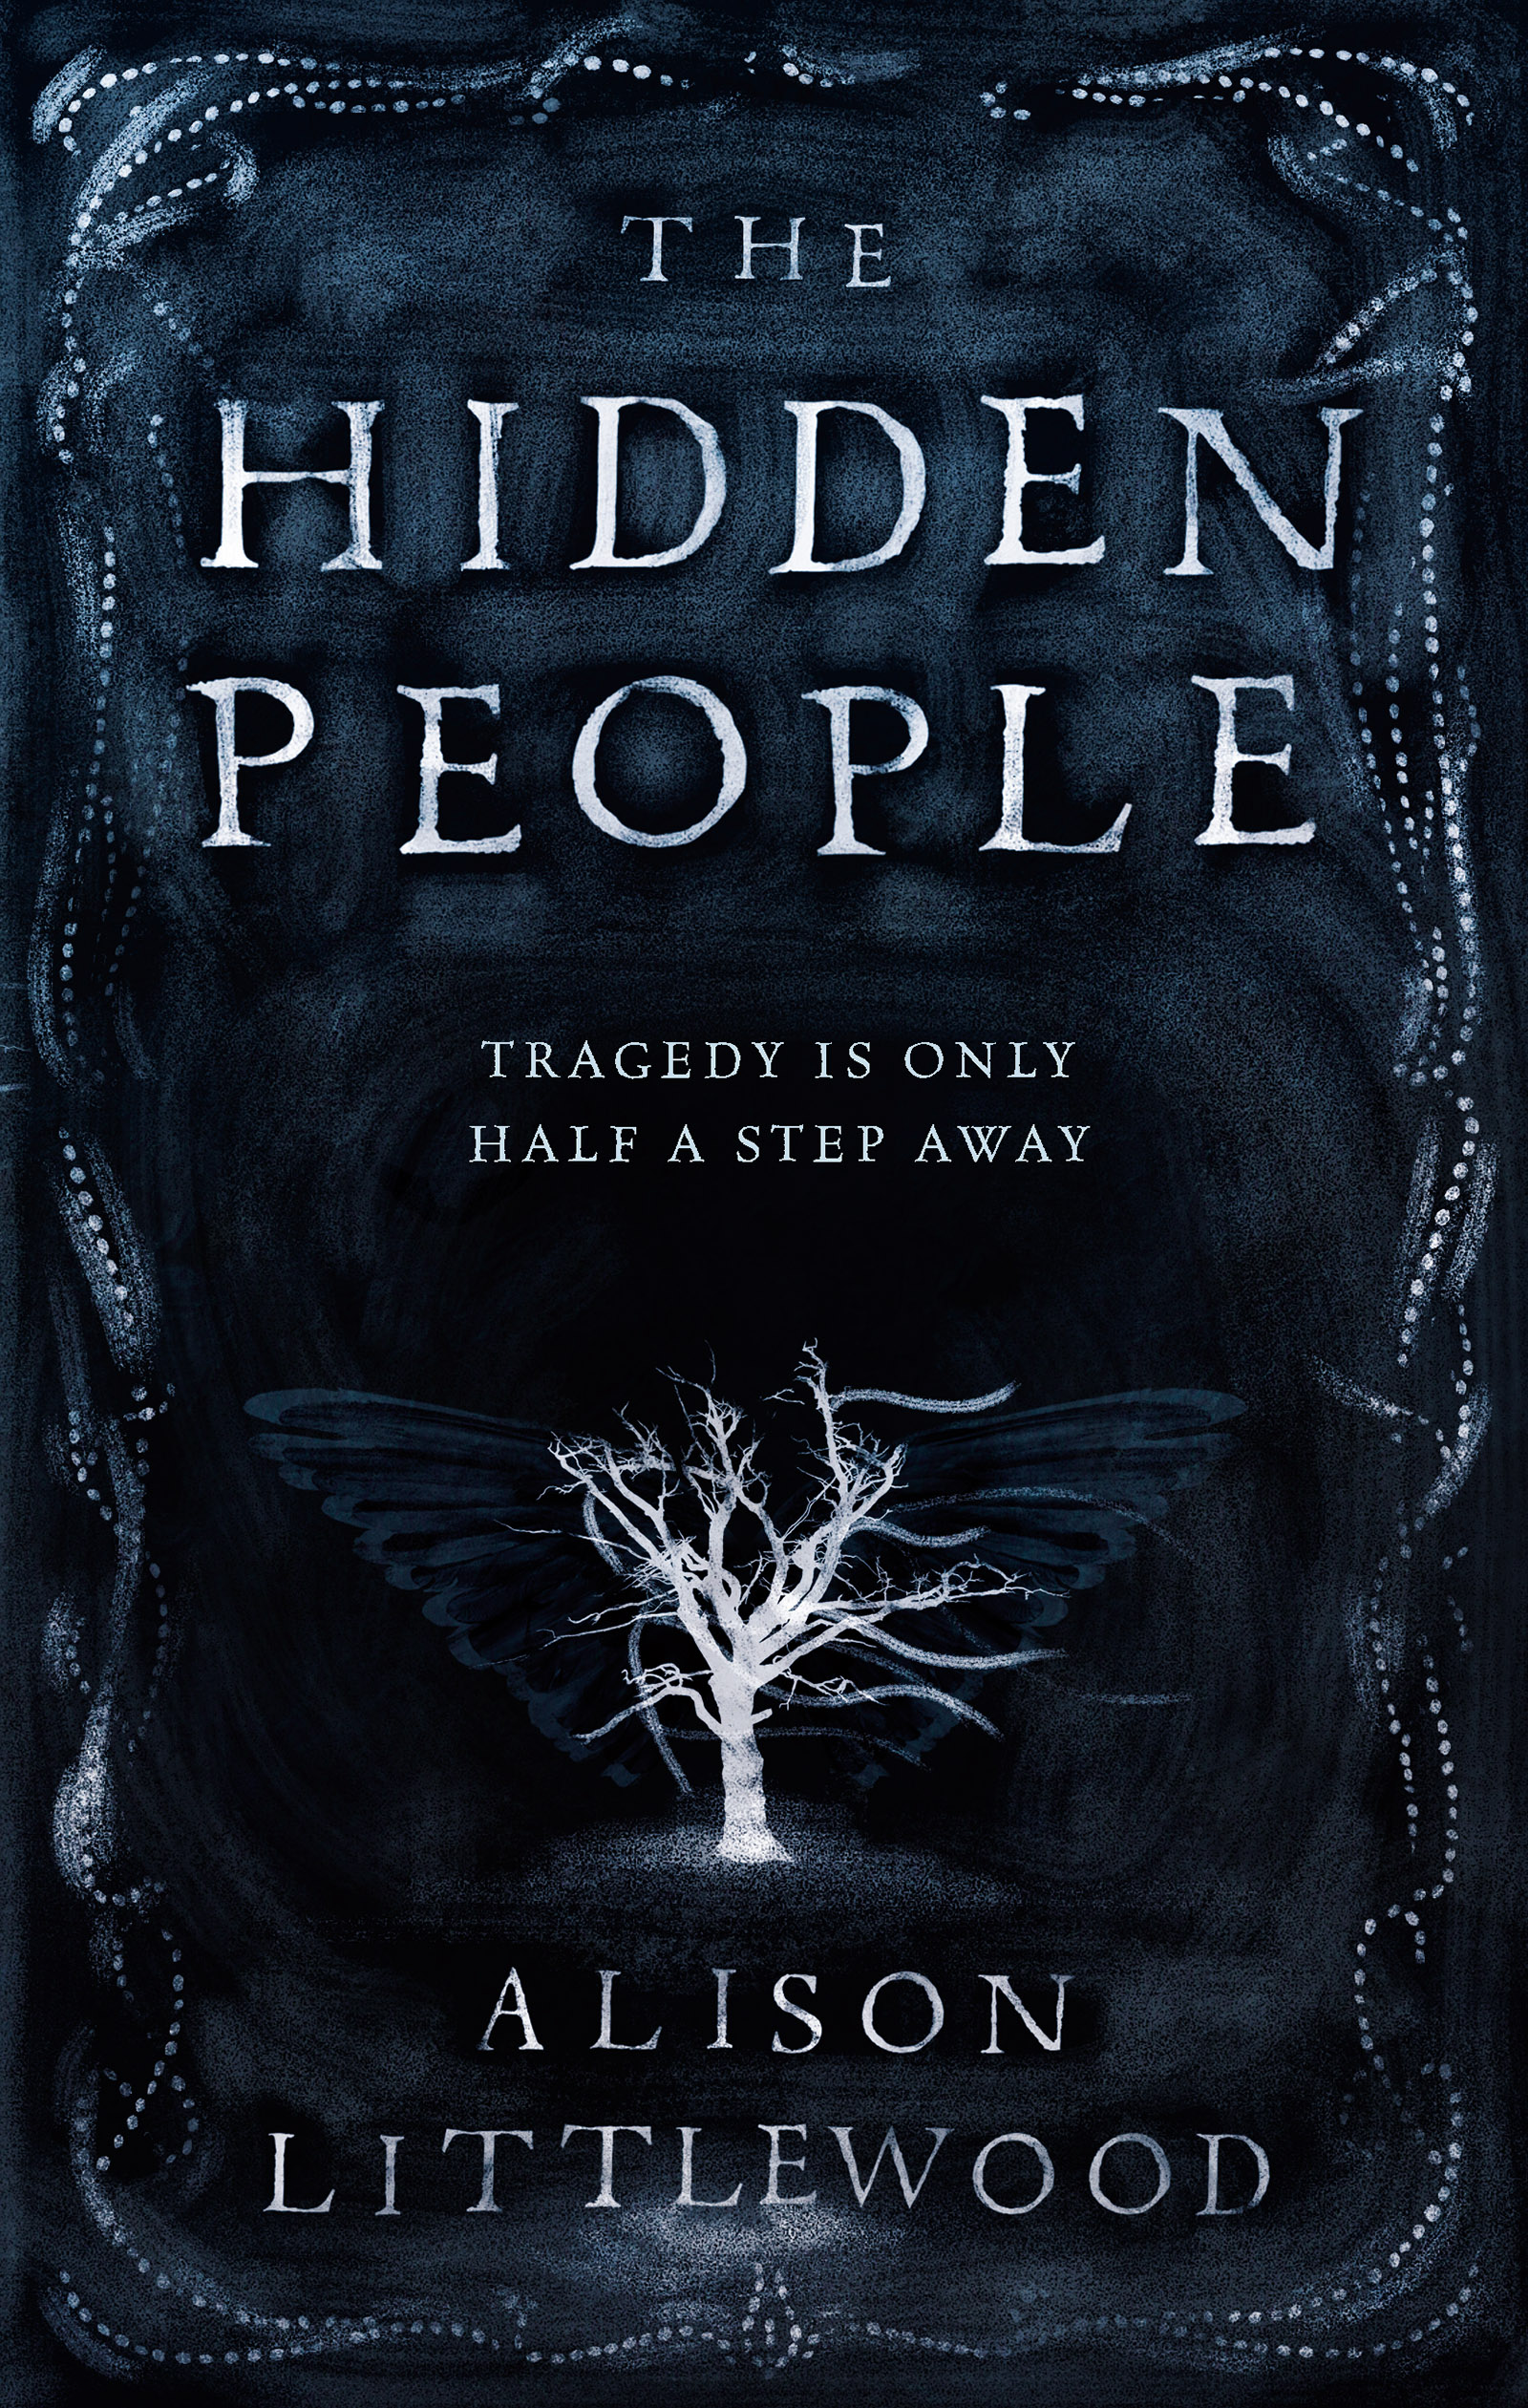 The Hidden People by Alison Littlewood book review